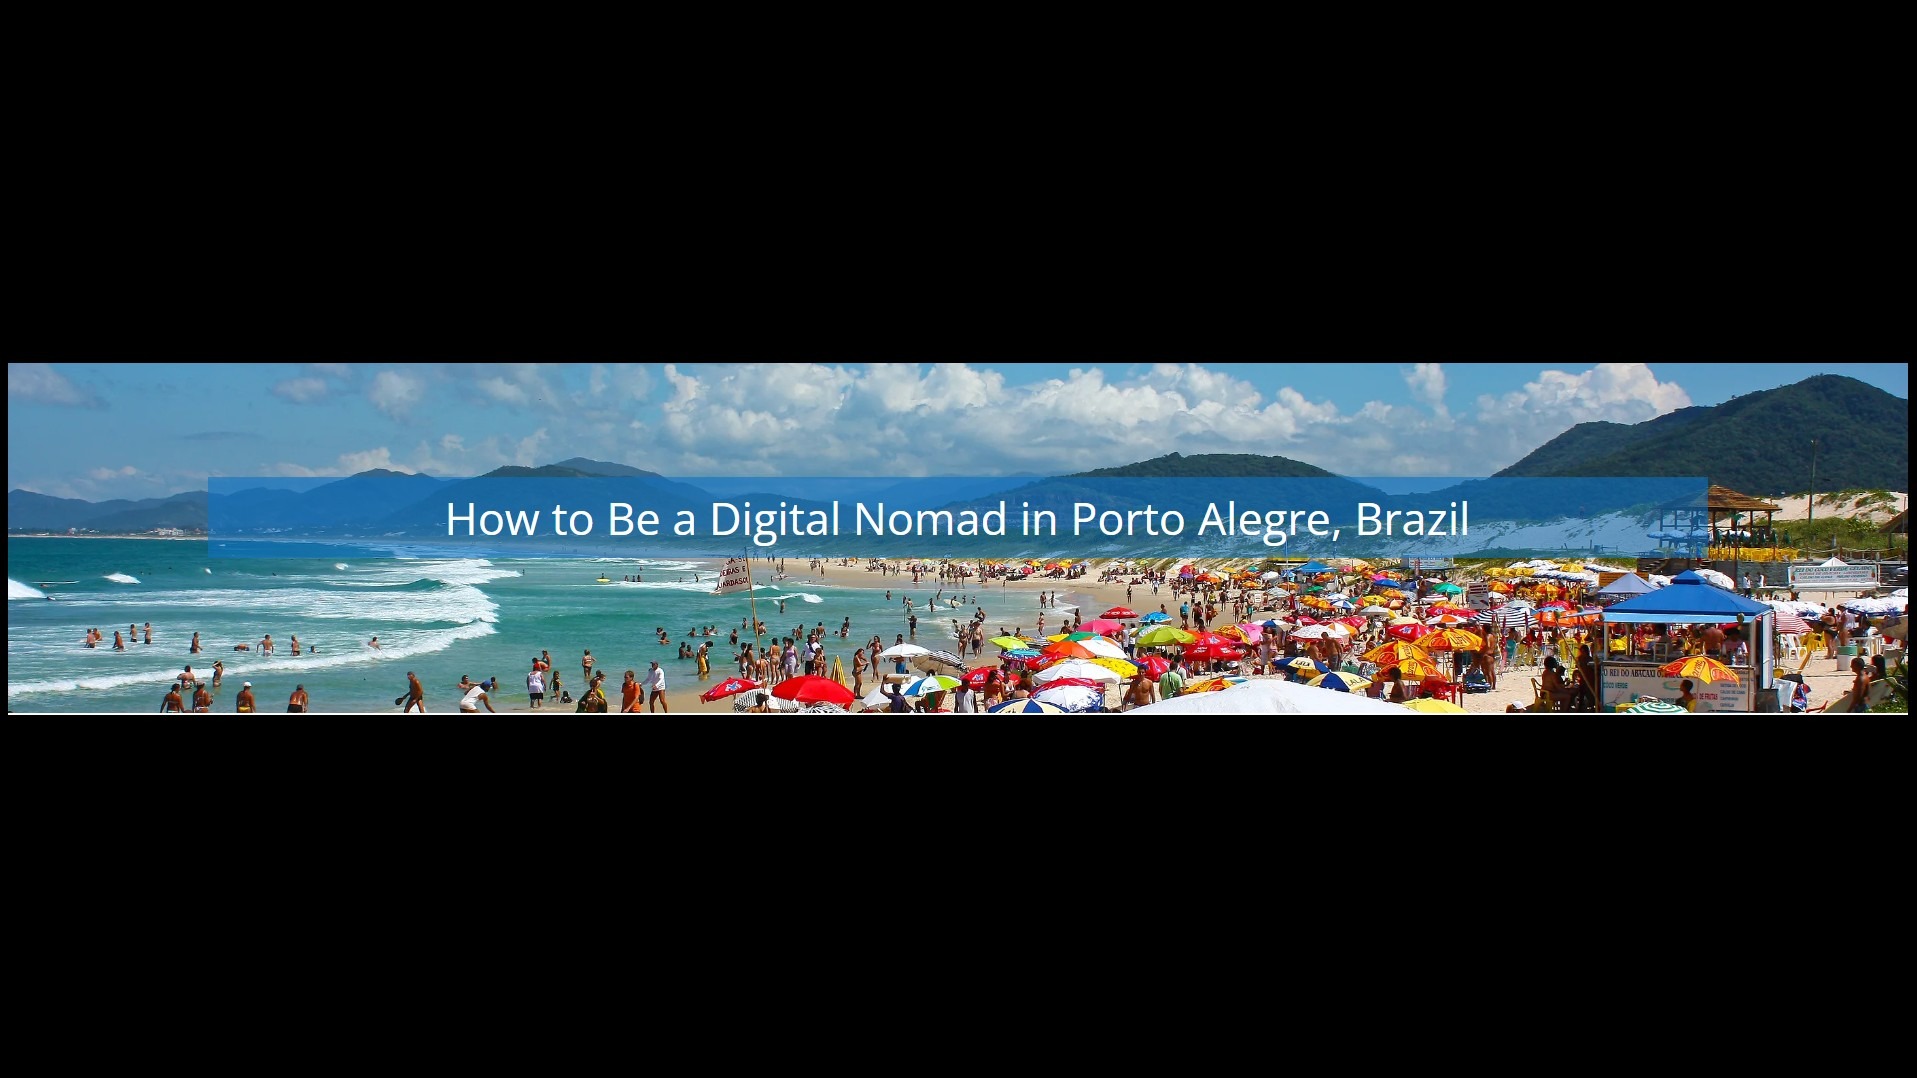 Your New Office: Discover Porto Alegre's Best Digital Nomad Work & Play Spots